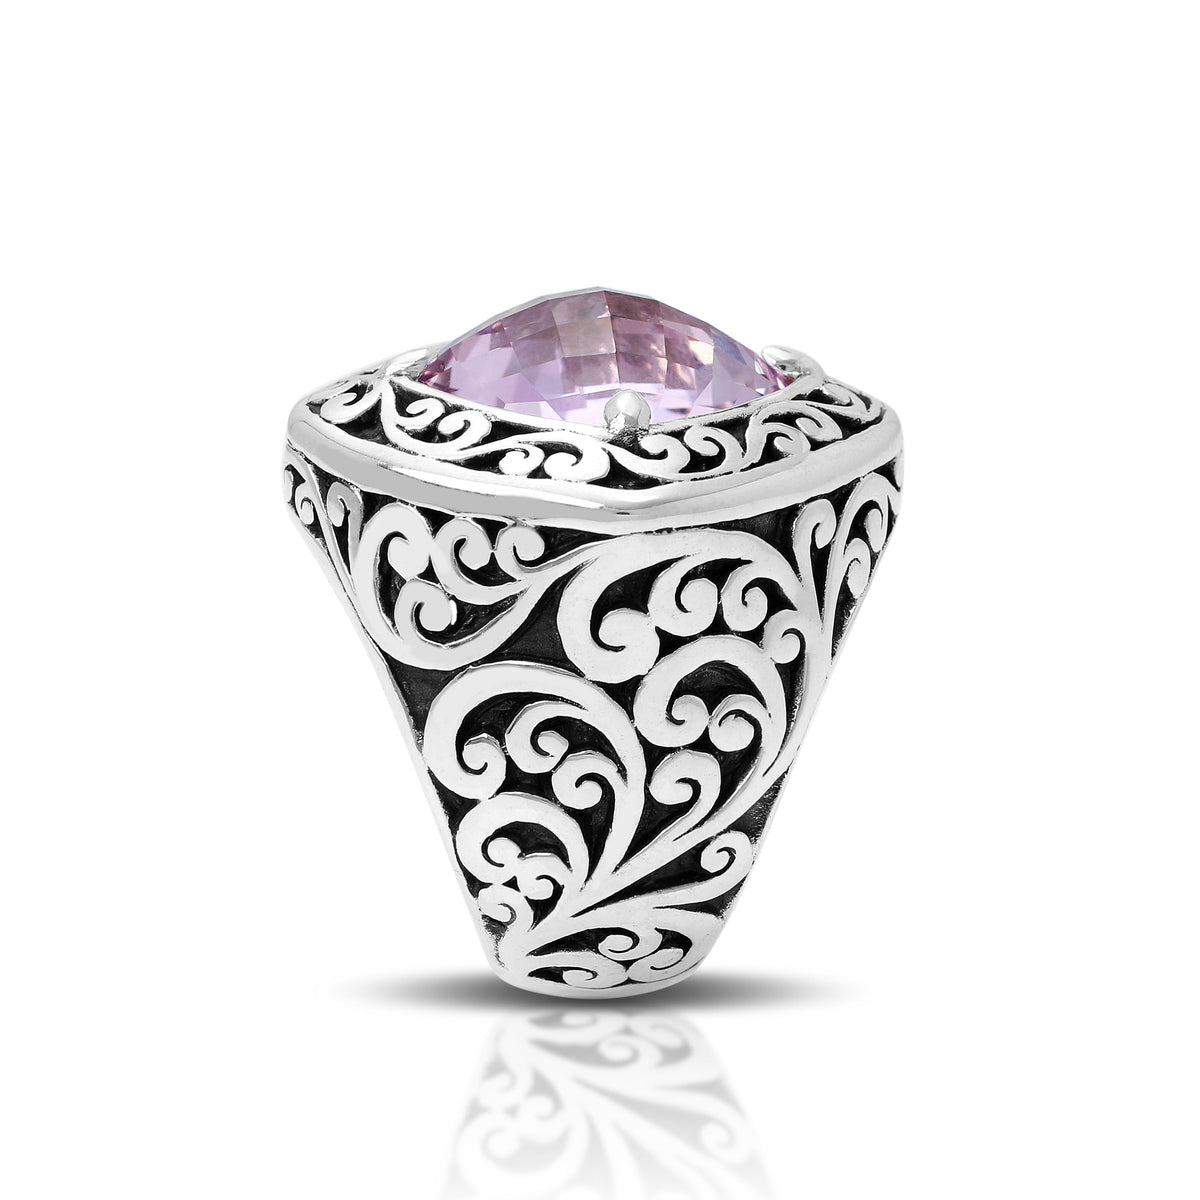 Square Sided "Rose de France" Gemstone (26mm) with Signature Scroll Ring ; Only 1pc left!